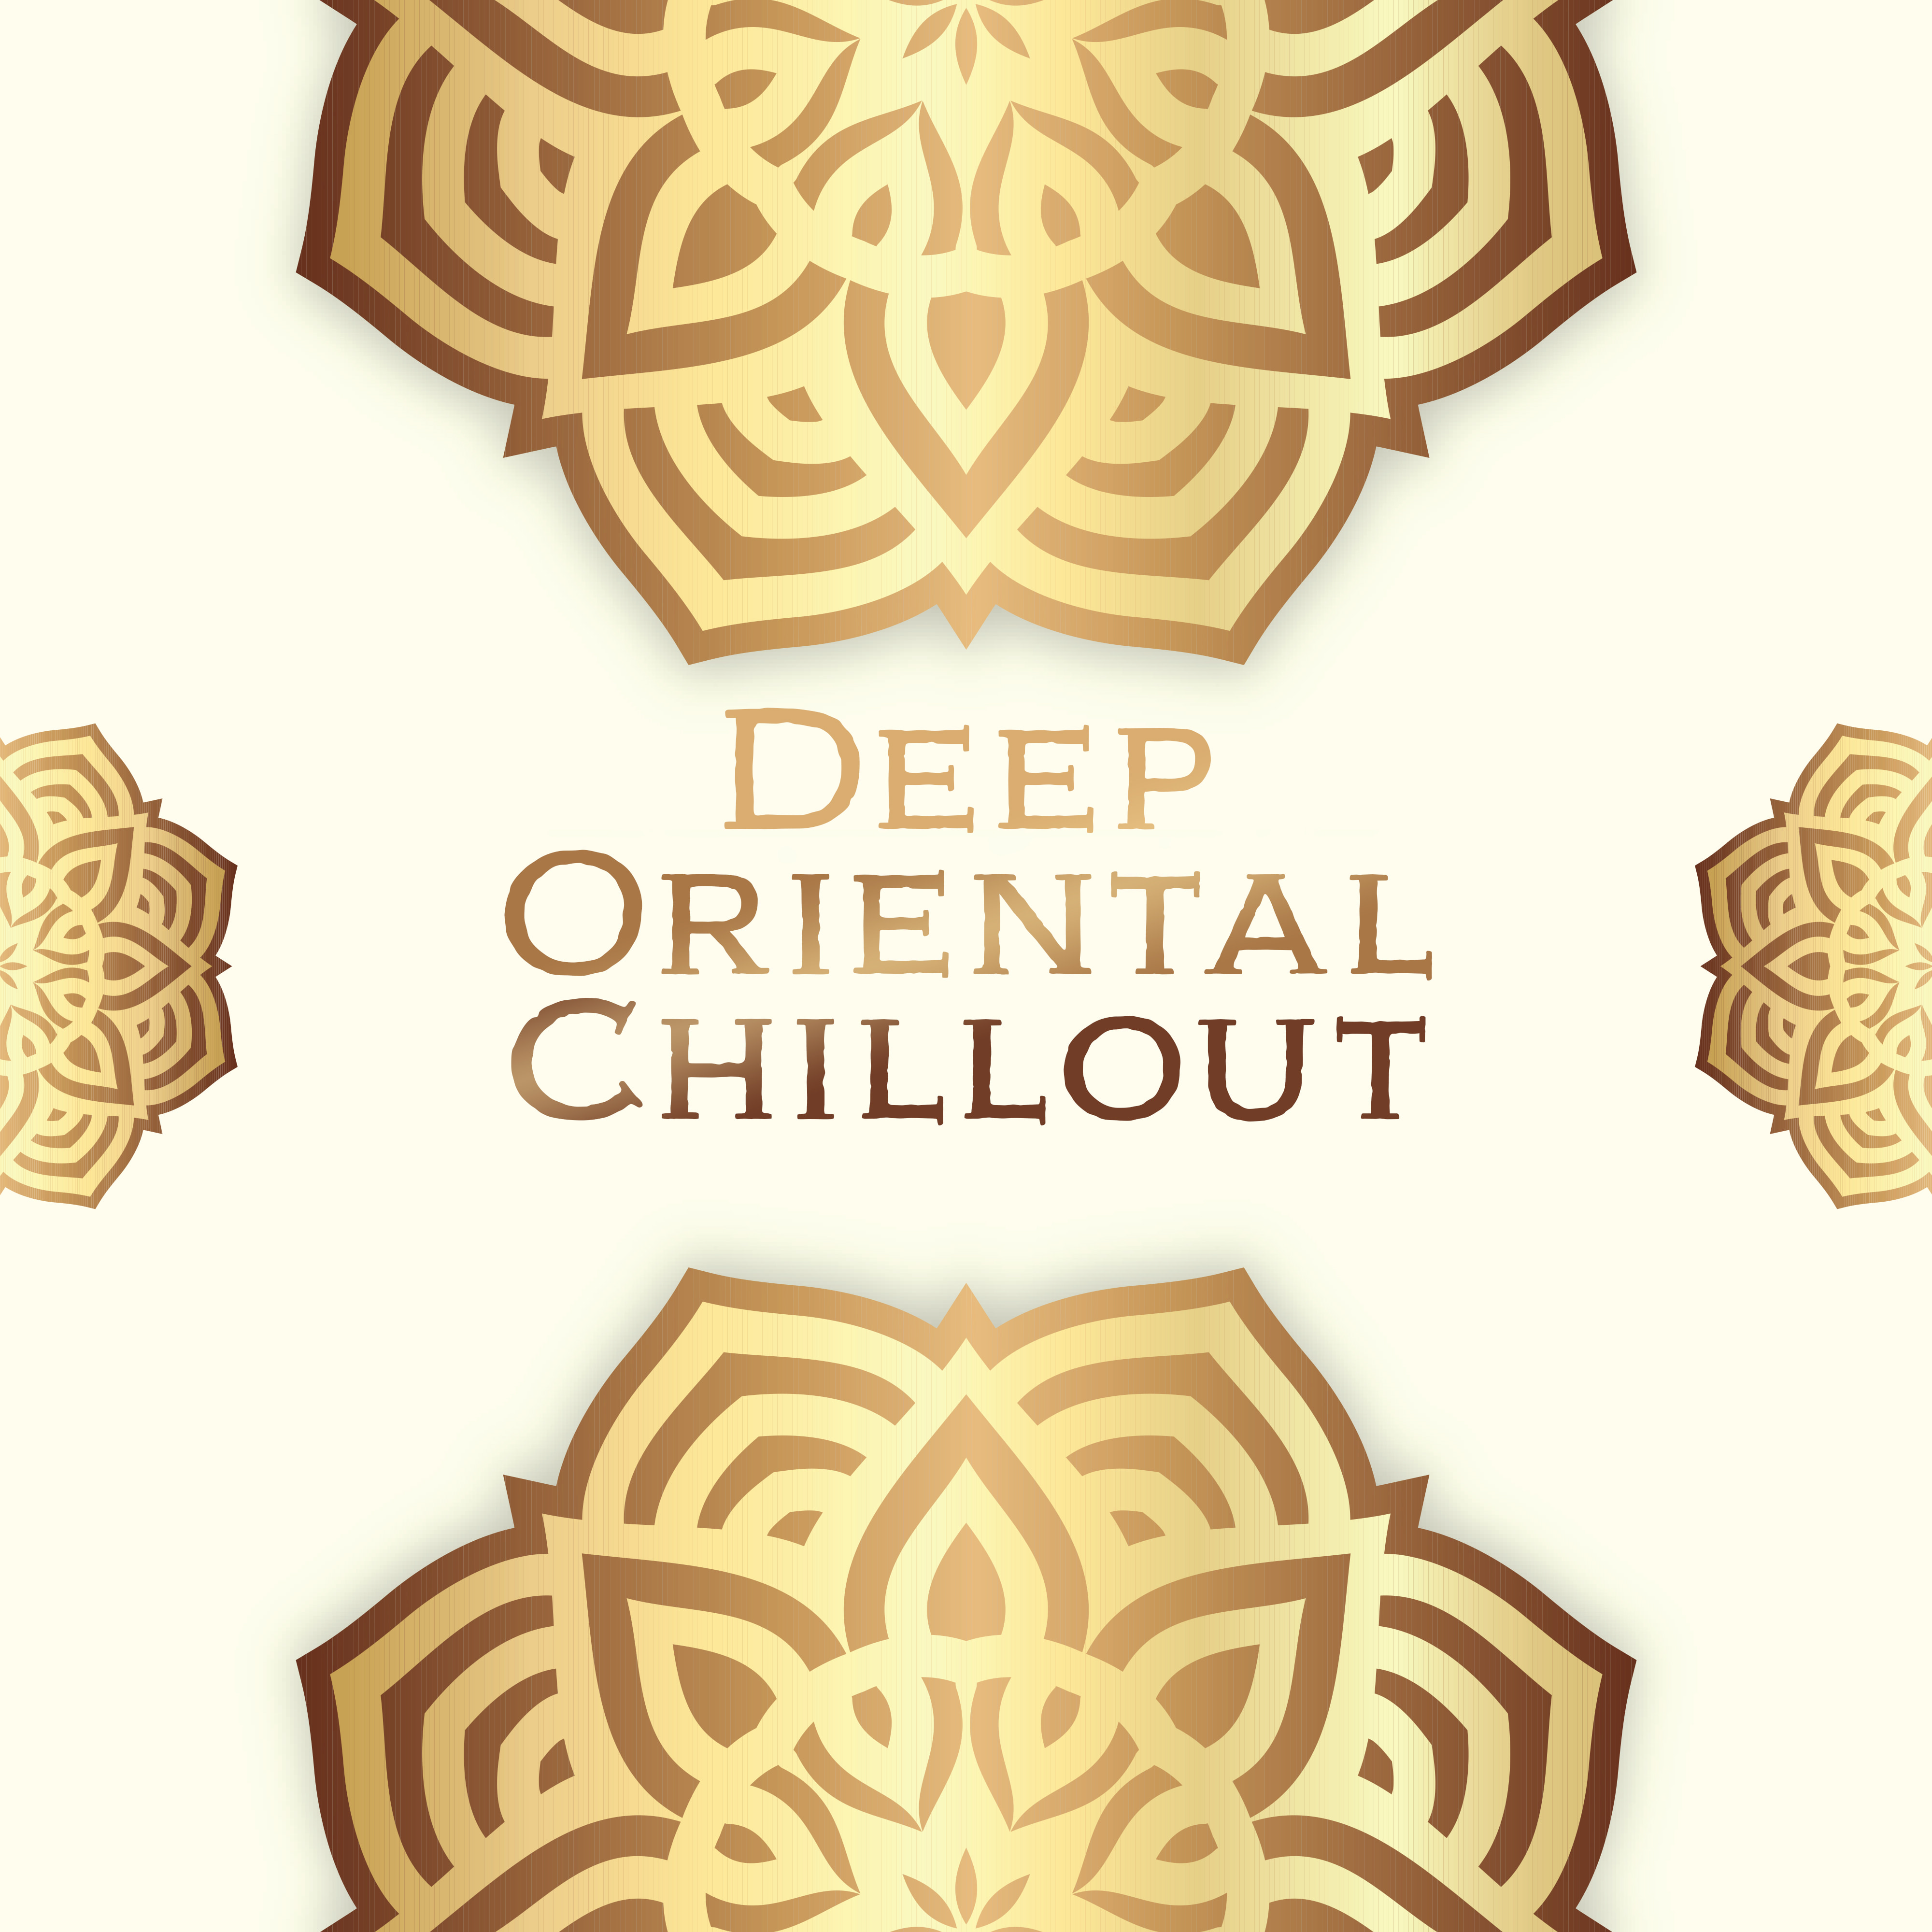 Deep Oriental Chillout